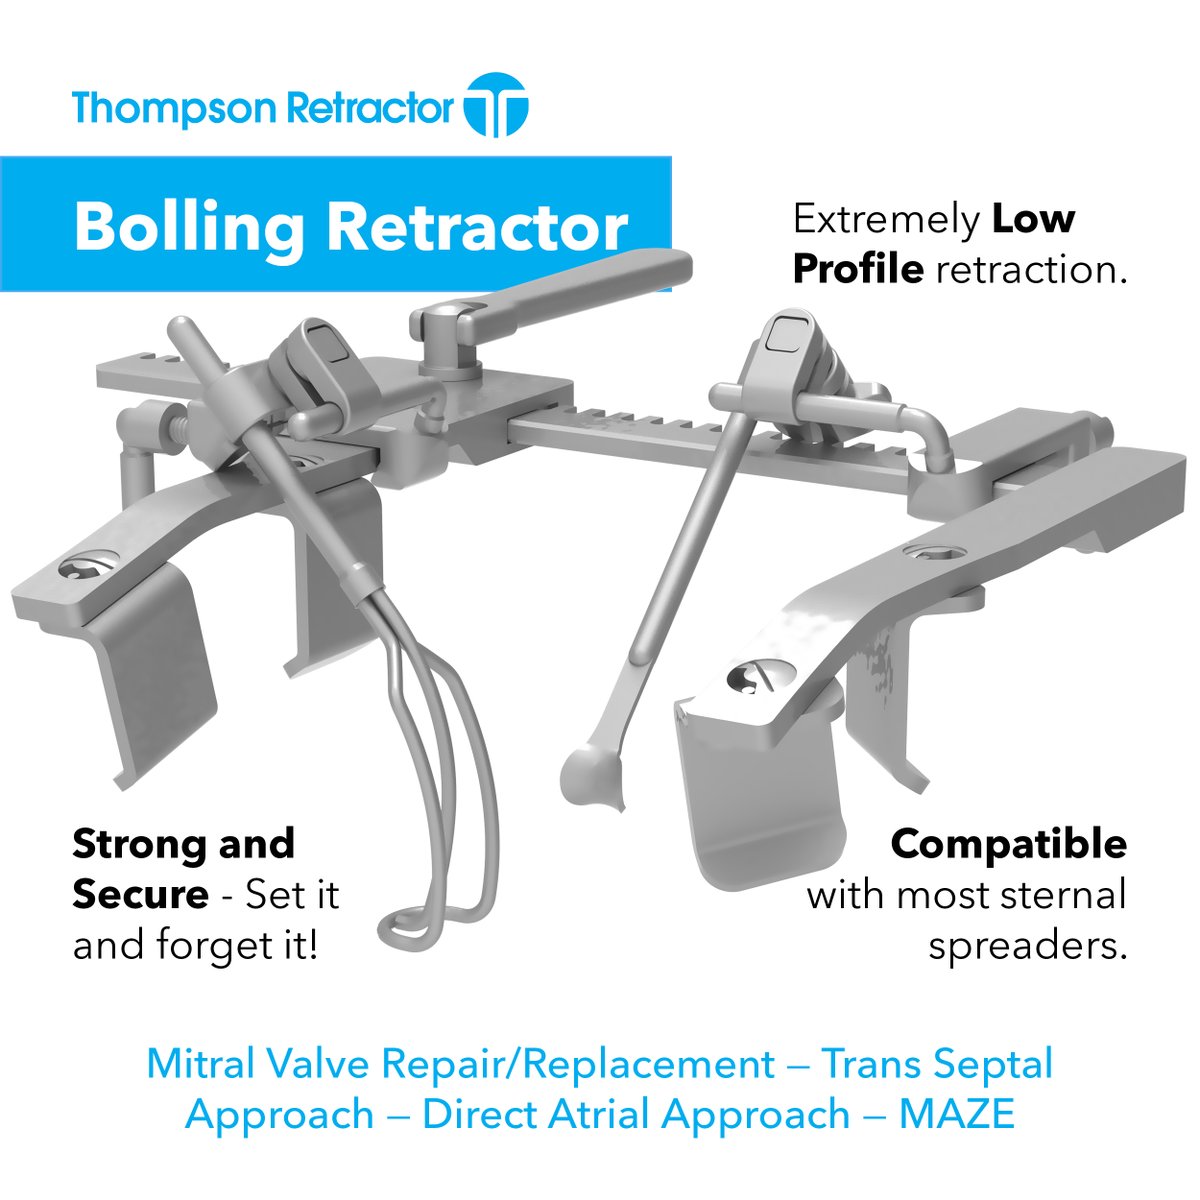 Other retractors getting in your way; creating a tunnel to work through? Bring in the Bolling by Thompson Retractor! Low profile, secure, and compatible with most spreaders. You just set it. And forget it! #thompsonretractor #bollingretractor